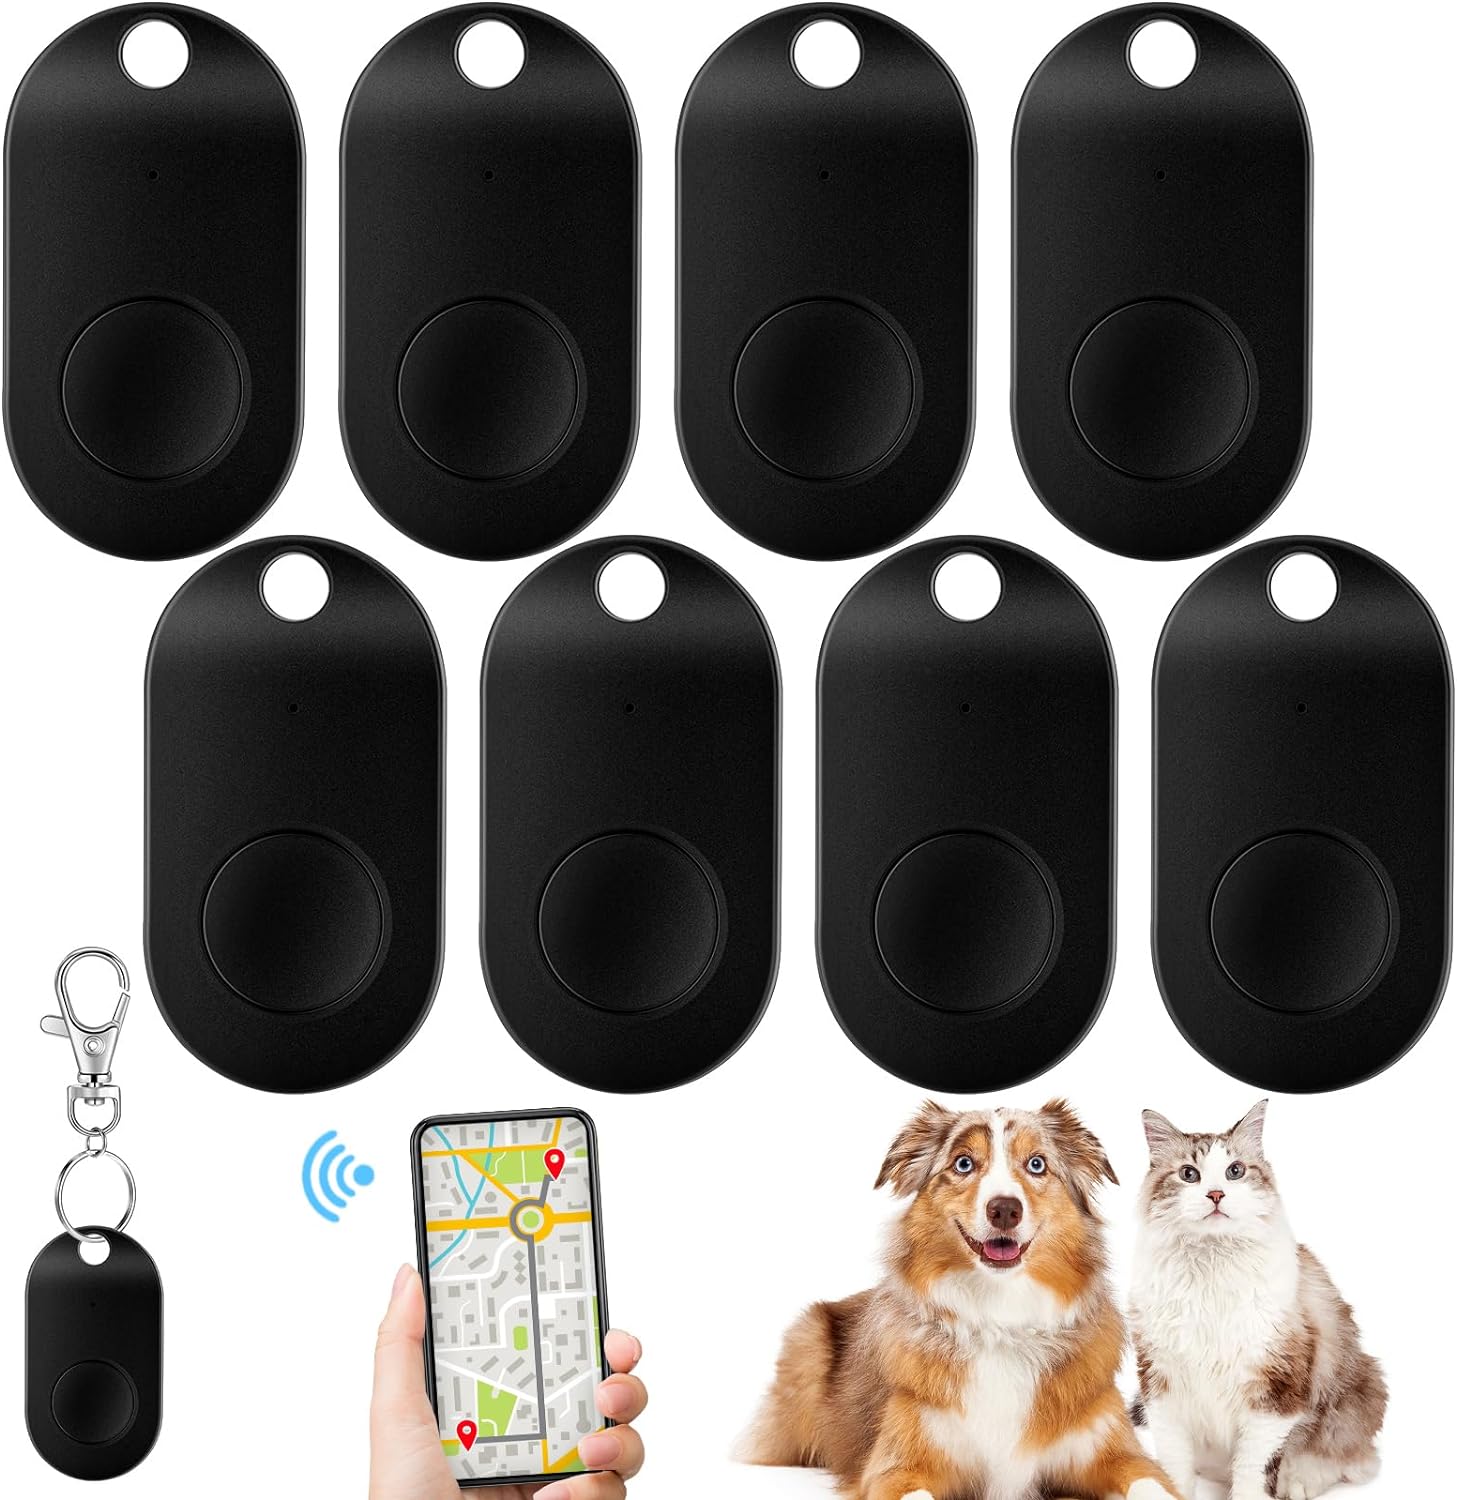 Saysurey 8 Pack Portable GPS Tracking Mobile Tracking Smart Anti Loss Device Waterproof Key Finder Locator Tracker Device for Kids Dog Pet Cat Wallet Keychain Luggage, Alarm Reminder, App Control